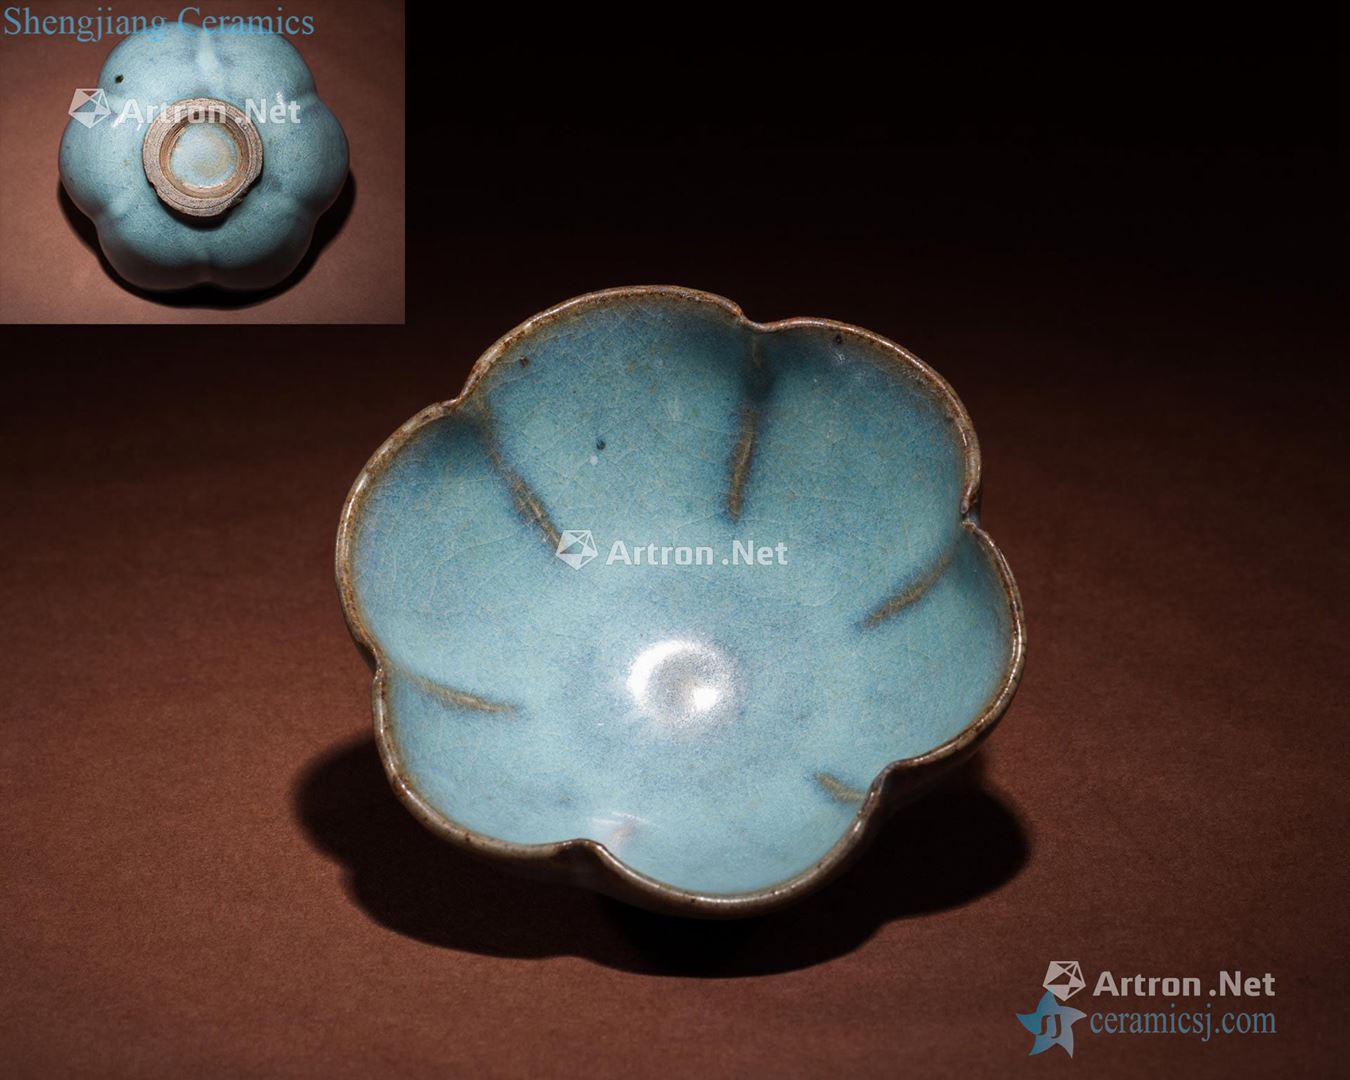 In the 12th century Flower mouth bowl masterpieces